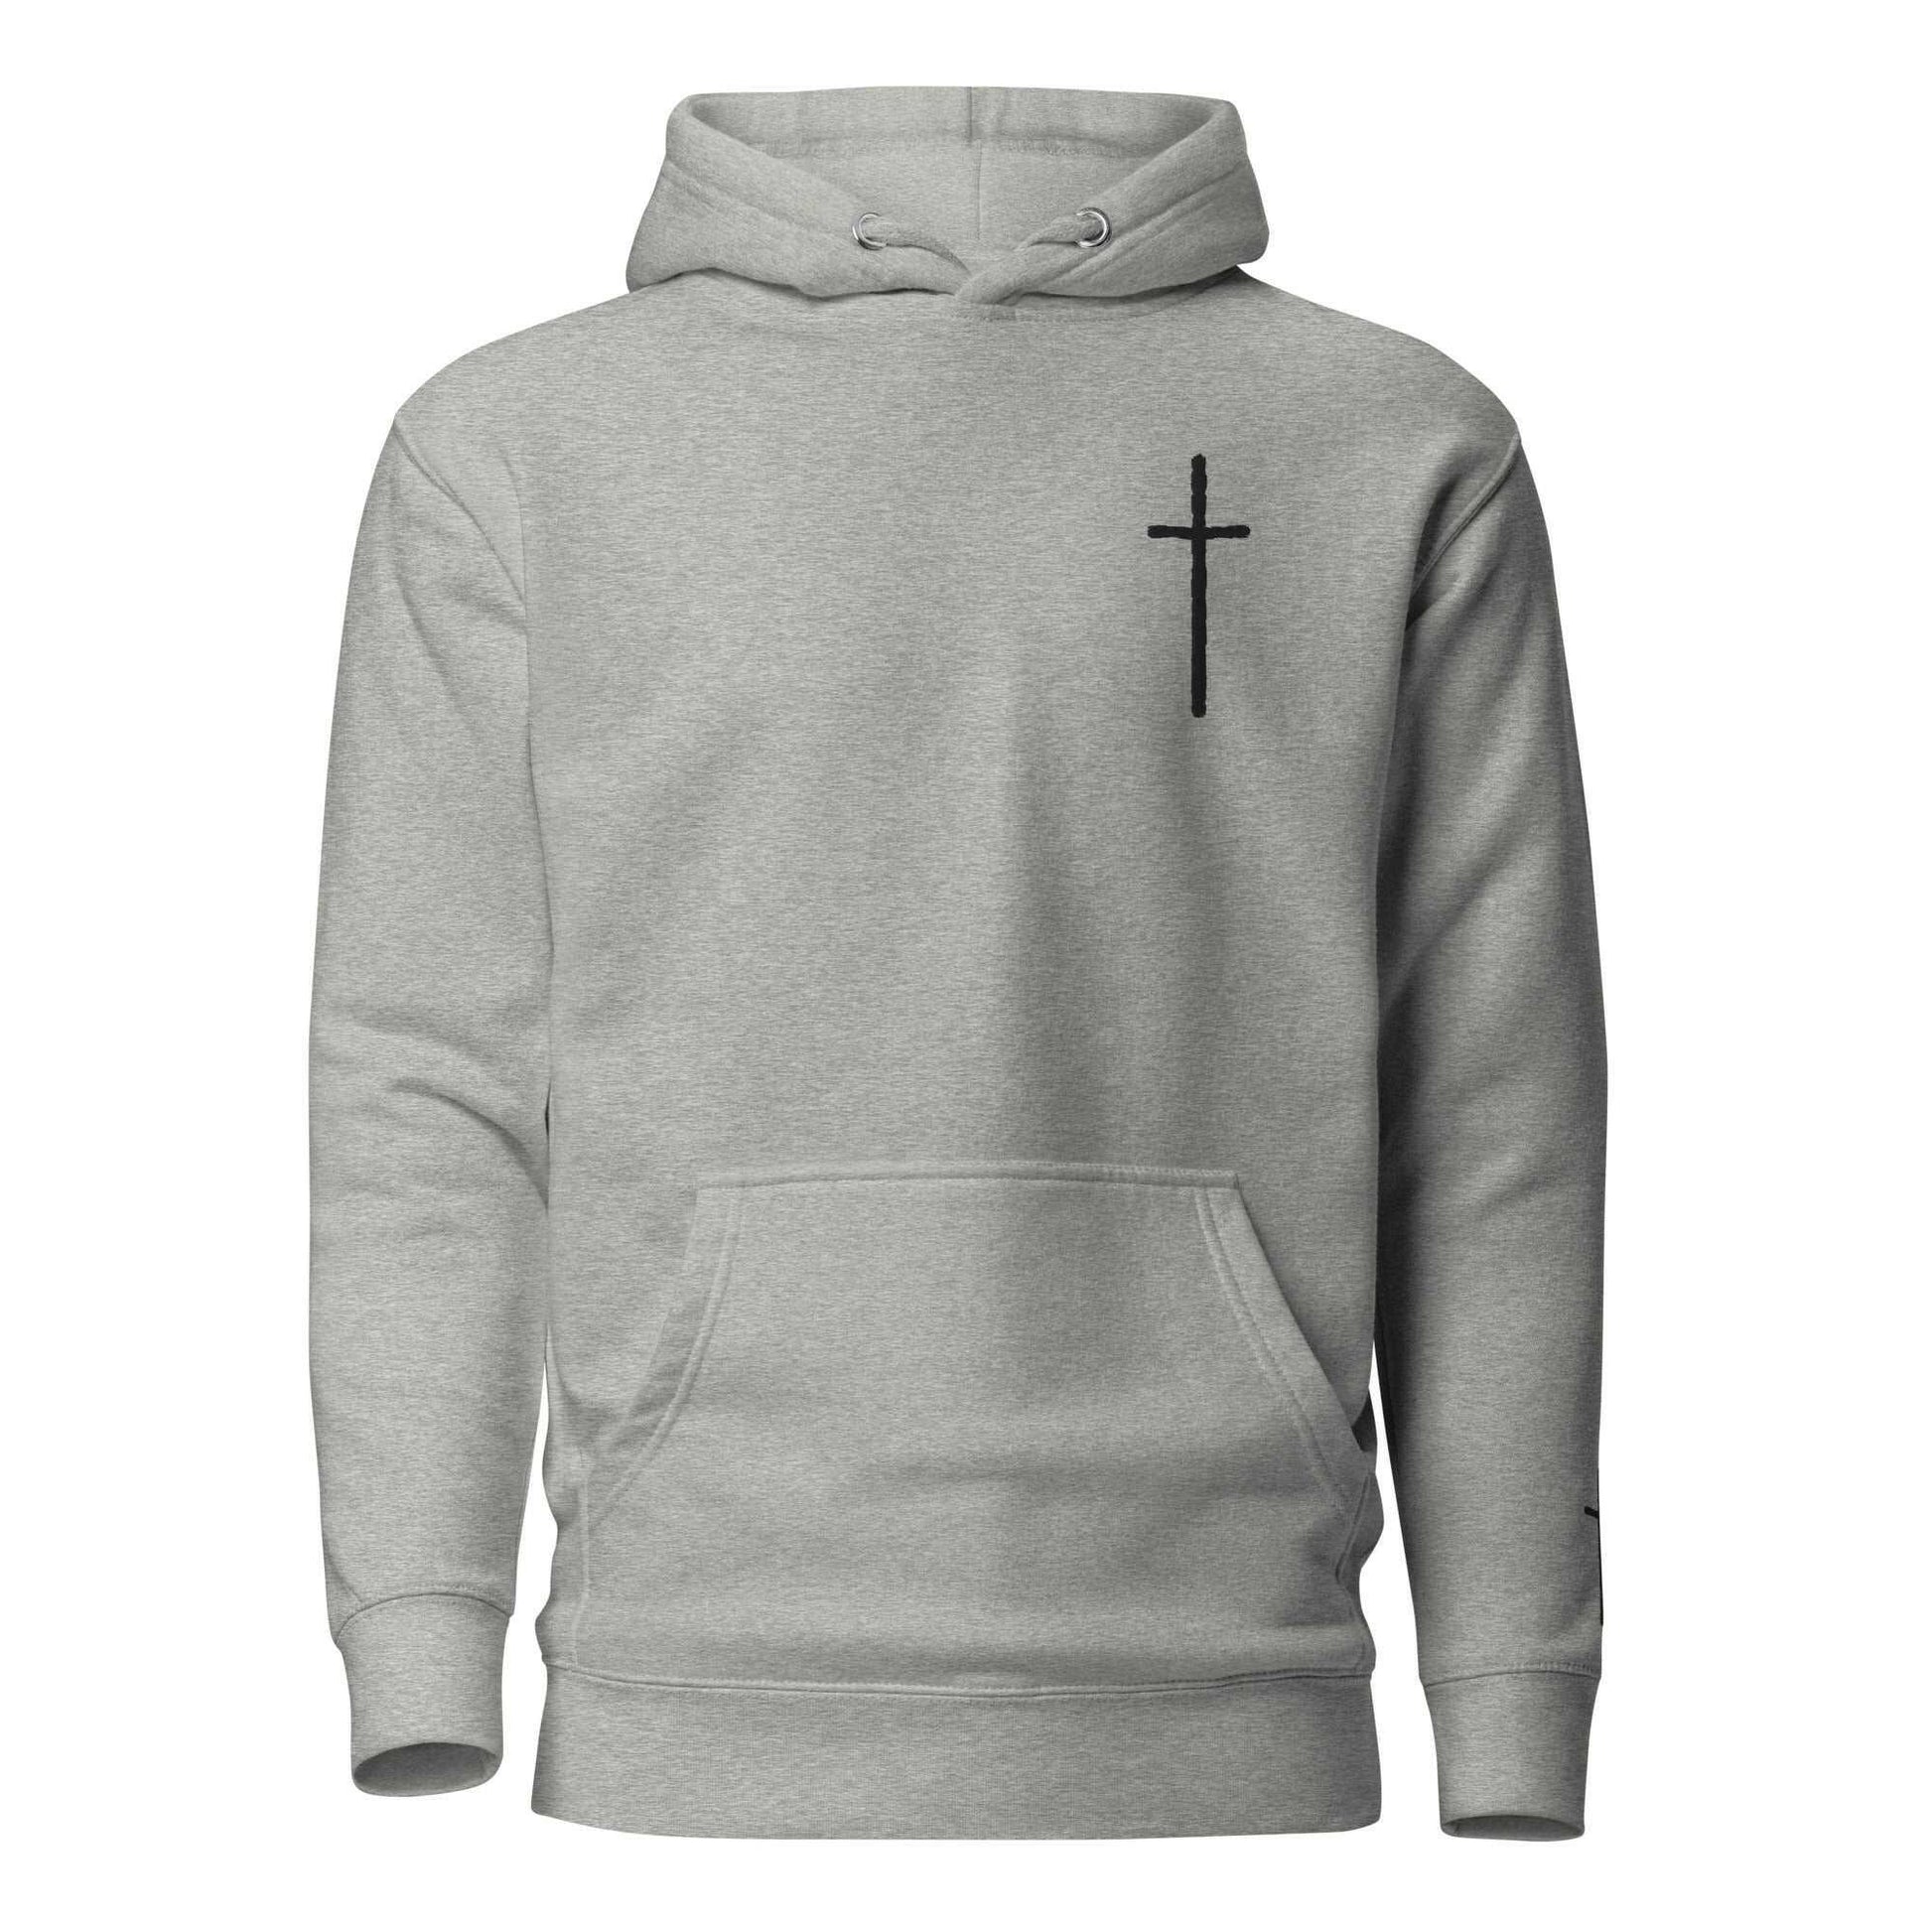 Embroidered Crucifix Unisex Hoodie